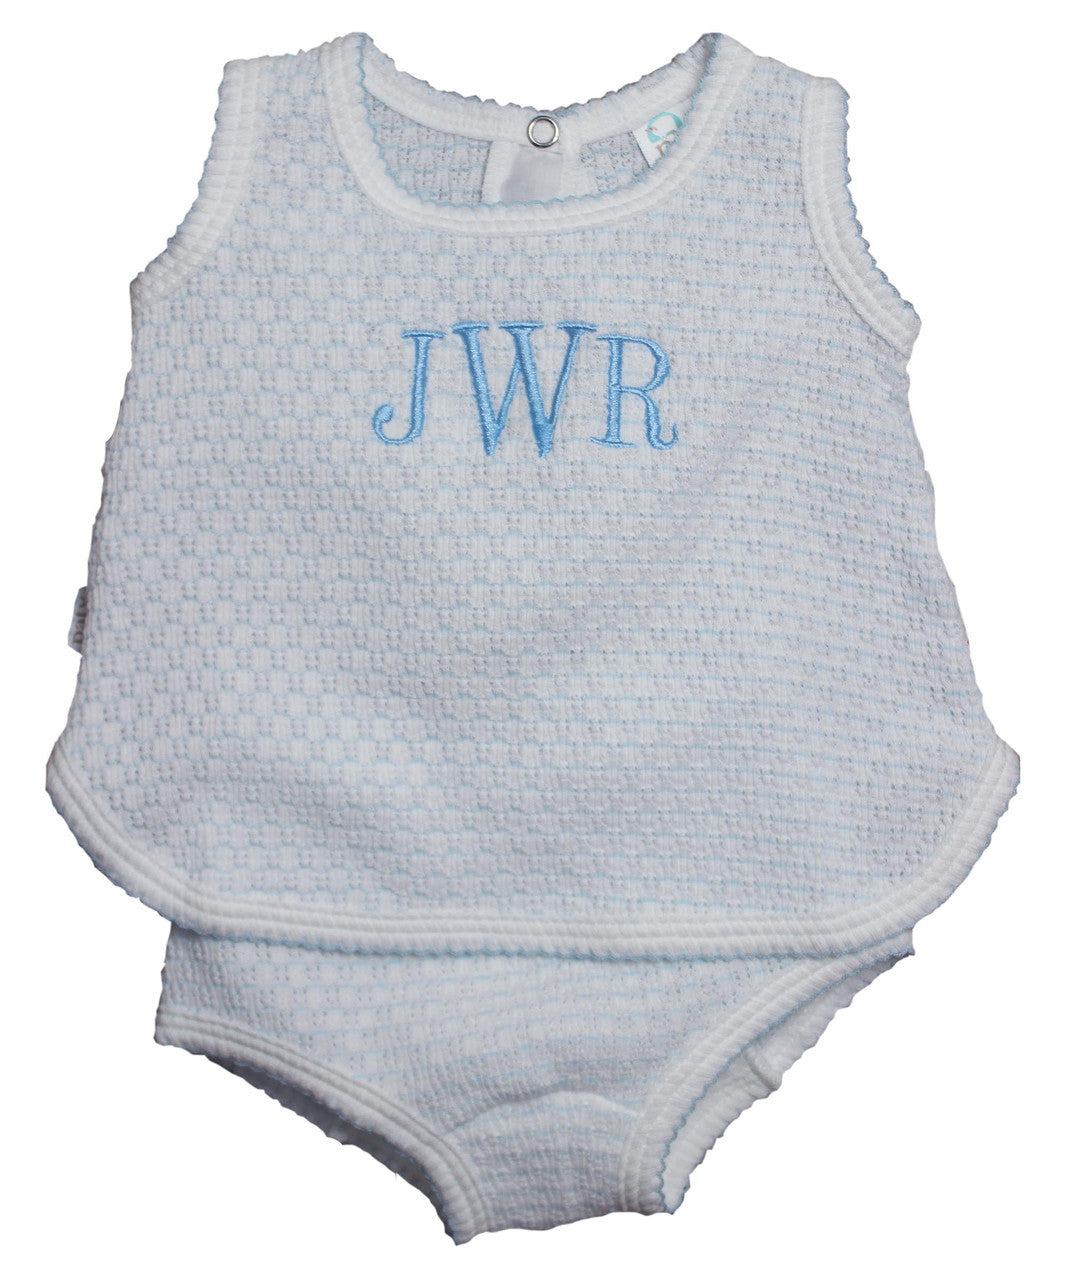 Boys Diaper Set Blue Knitted Layette